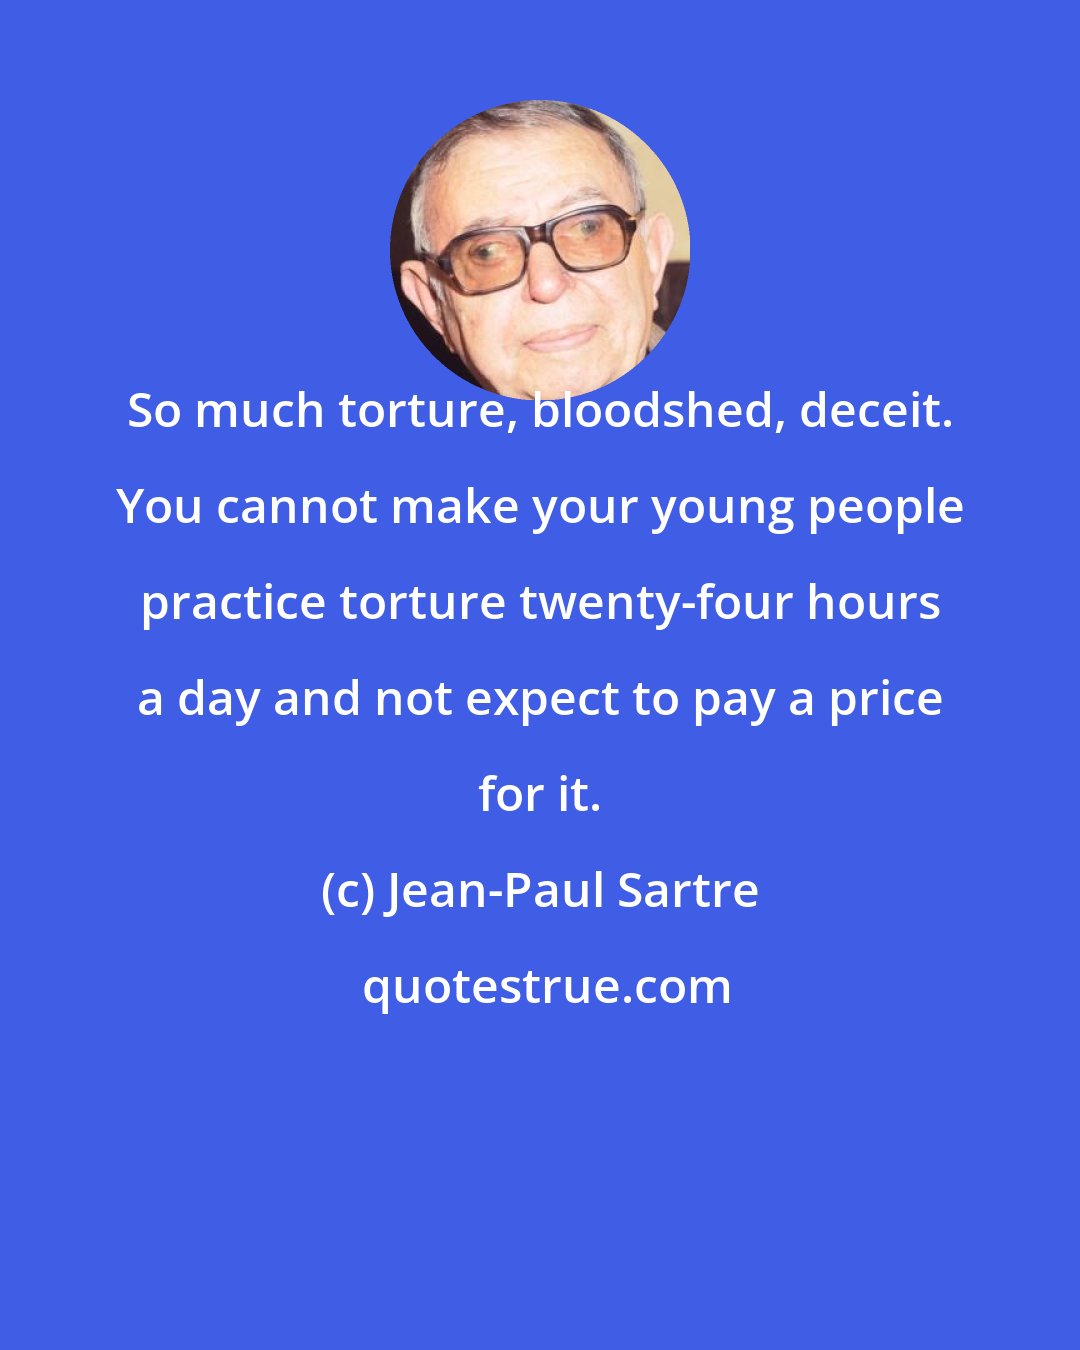 Jean-Paul Sartre: So much torture, bloodshed, deceit. You cannot make your young people practice torture twenty-four hours a day and not expect to pay a price for it.